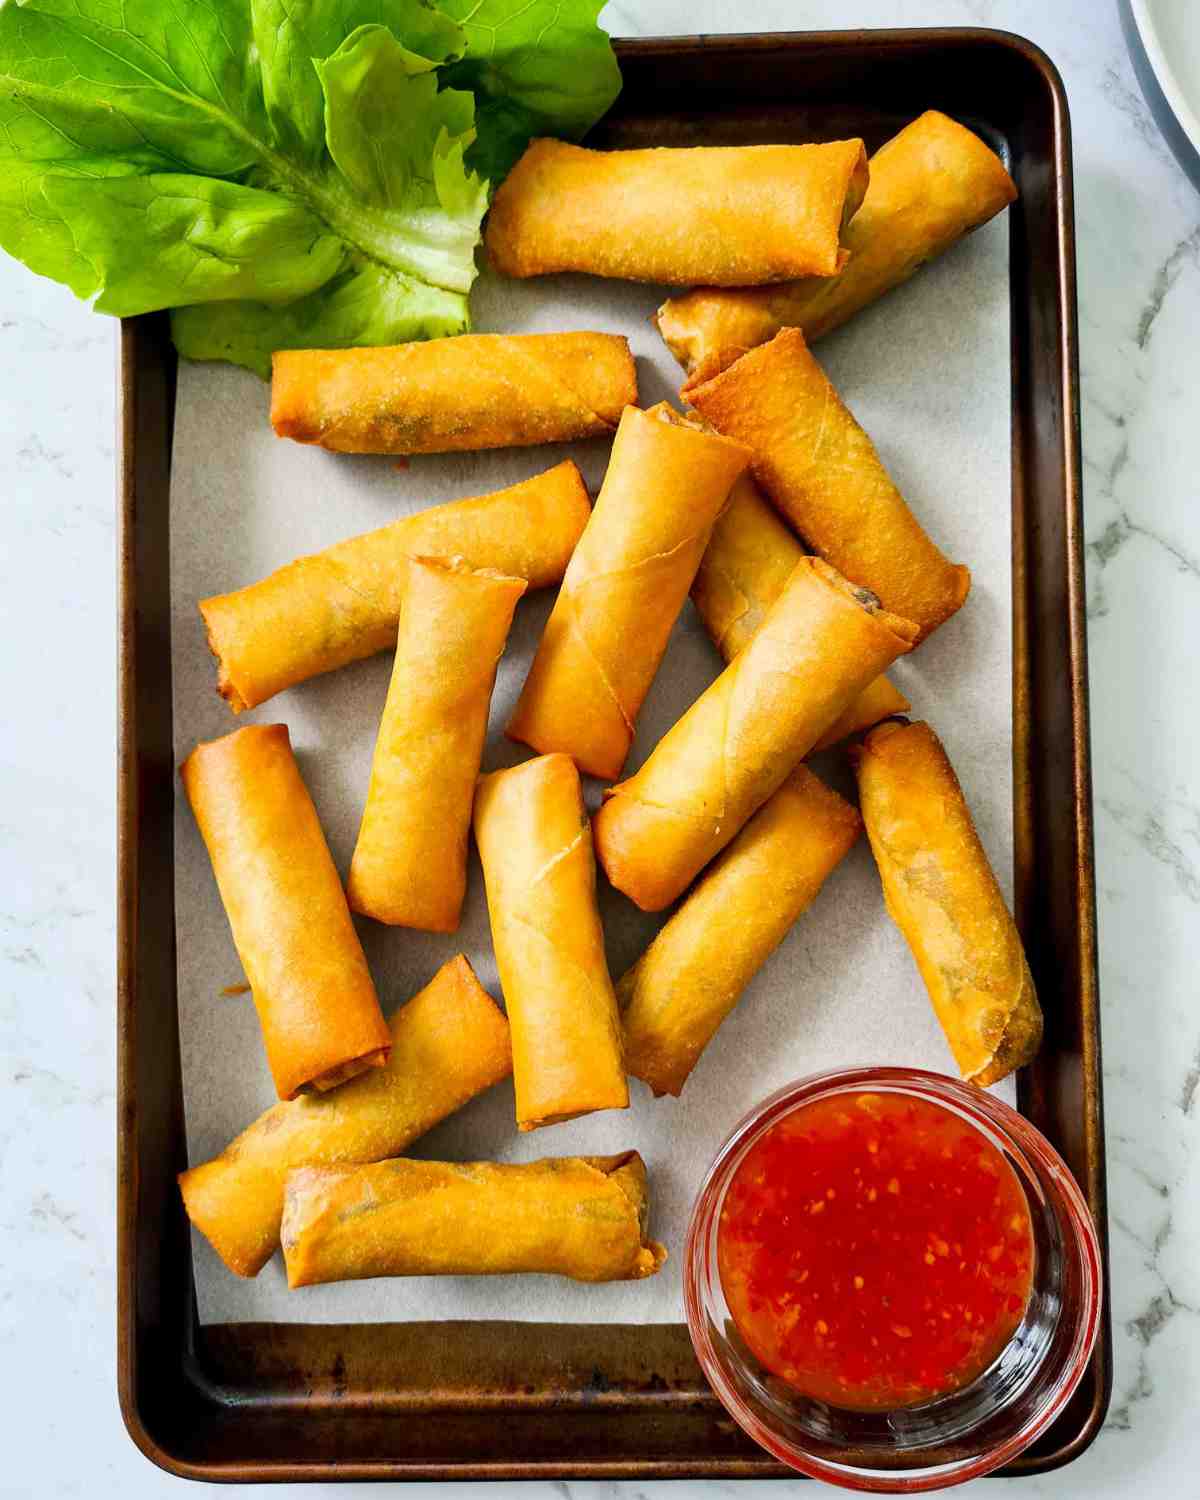 Crispy golden pastry rolls in a lined baking tray with a small bowl of sauce